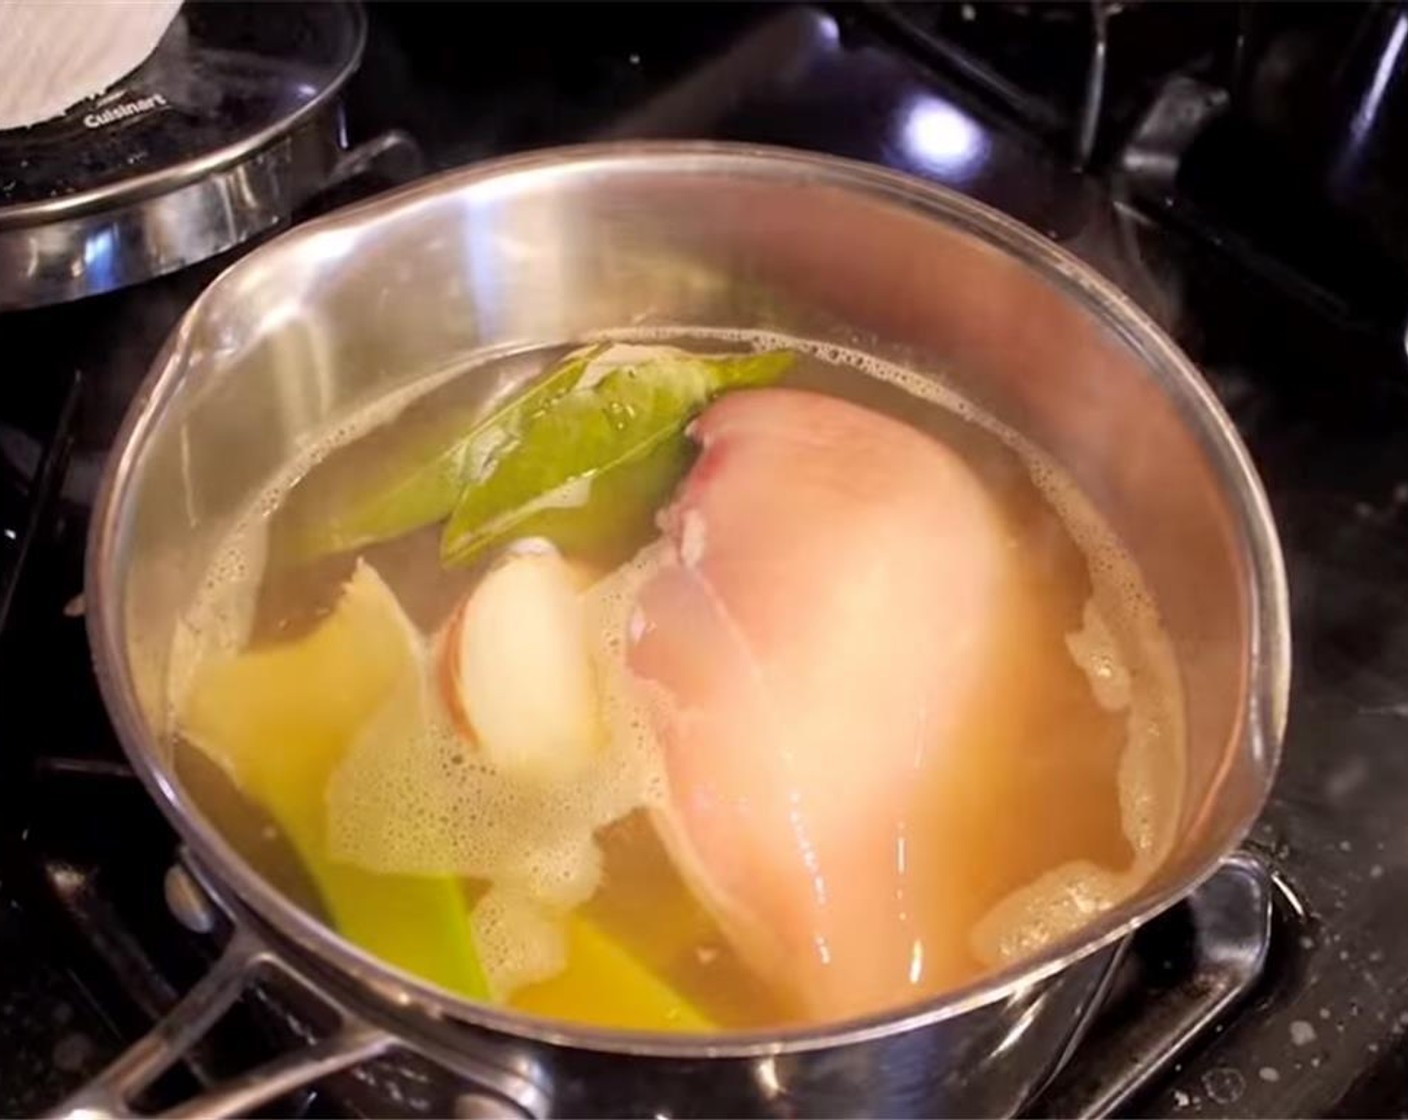 step 4 Heat some Oil (as needed) in a soup pot, then add onions and garlic. Cook until golden. Heat Chicken Stock (4 cups) in a separate pot, then add Chicken Breast (1). Cover pot and cook on medium-low heat until cooked through, 20-25 minutes.